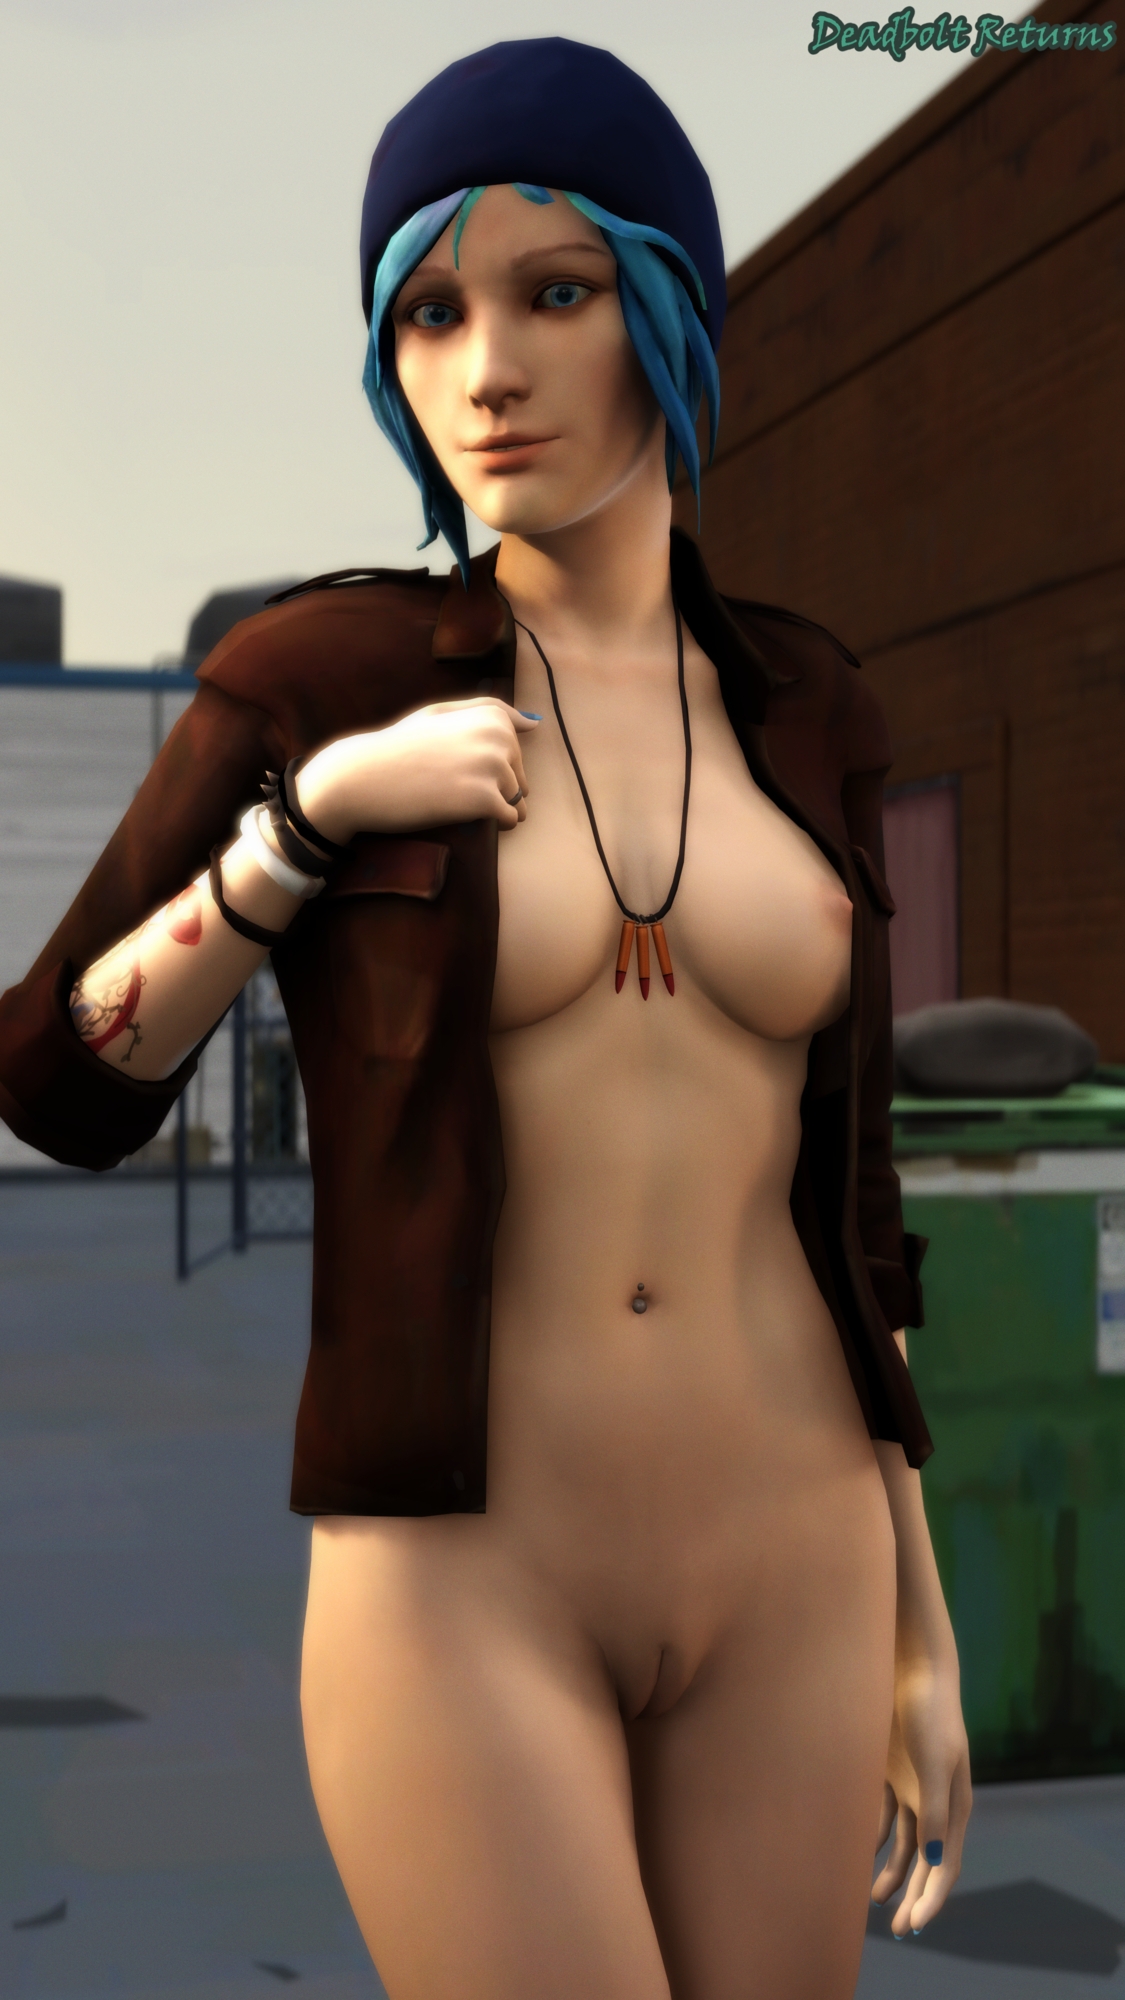 Chloe Back Alley Photoshoot Chloe Price Chloe Life Is Strange Sfm Source Filmmaker Nsfw 3dnsfw 3d Porn 3d Girl Nude Nudes In The Nude Partially_nude Solo Pinup 3